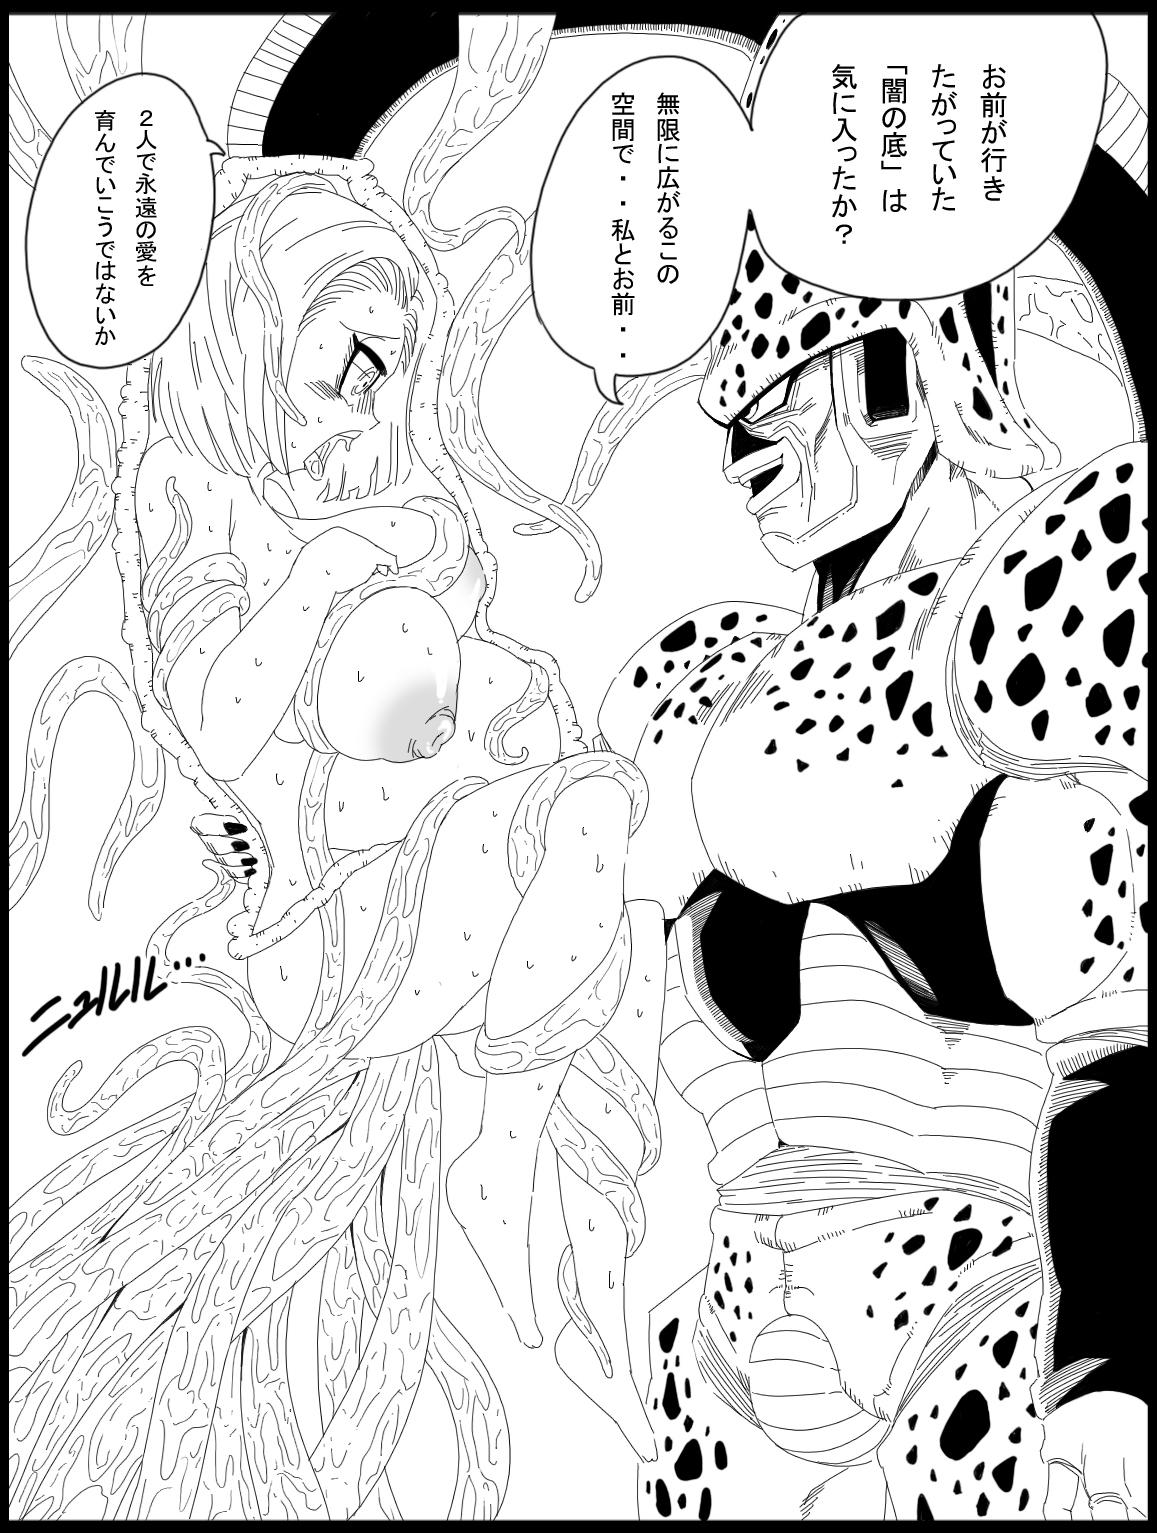 Sweet Dragon Road 14 - Dragon ball z Best Blow Job Ever - Page 11